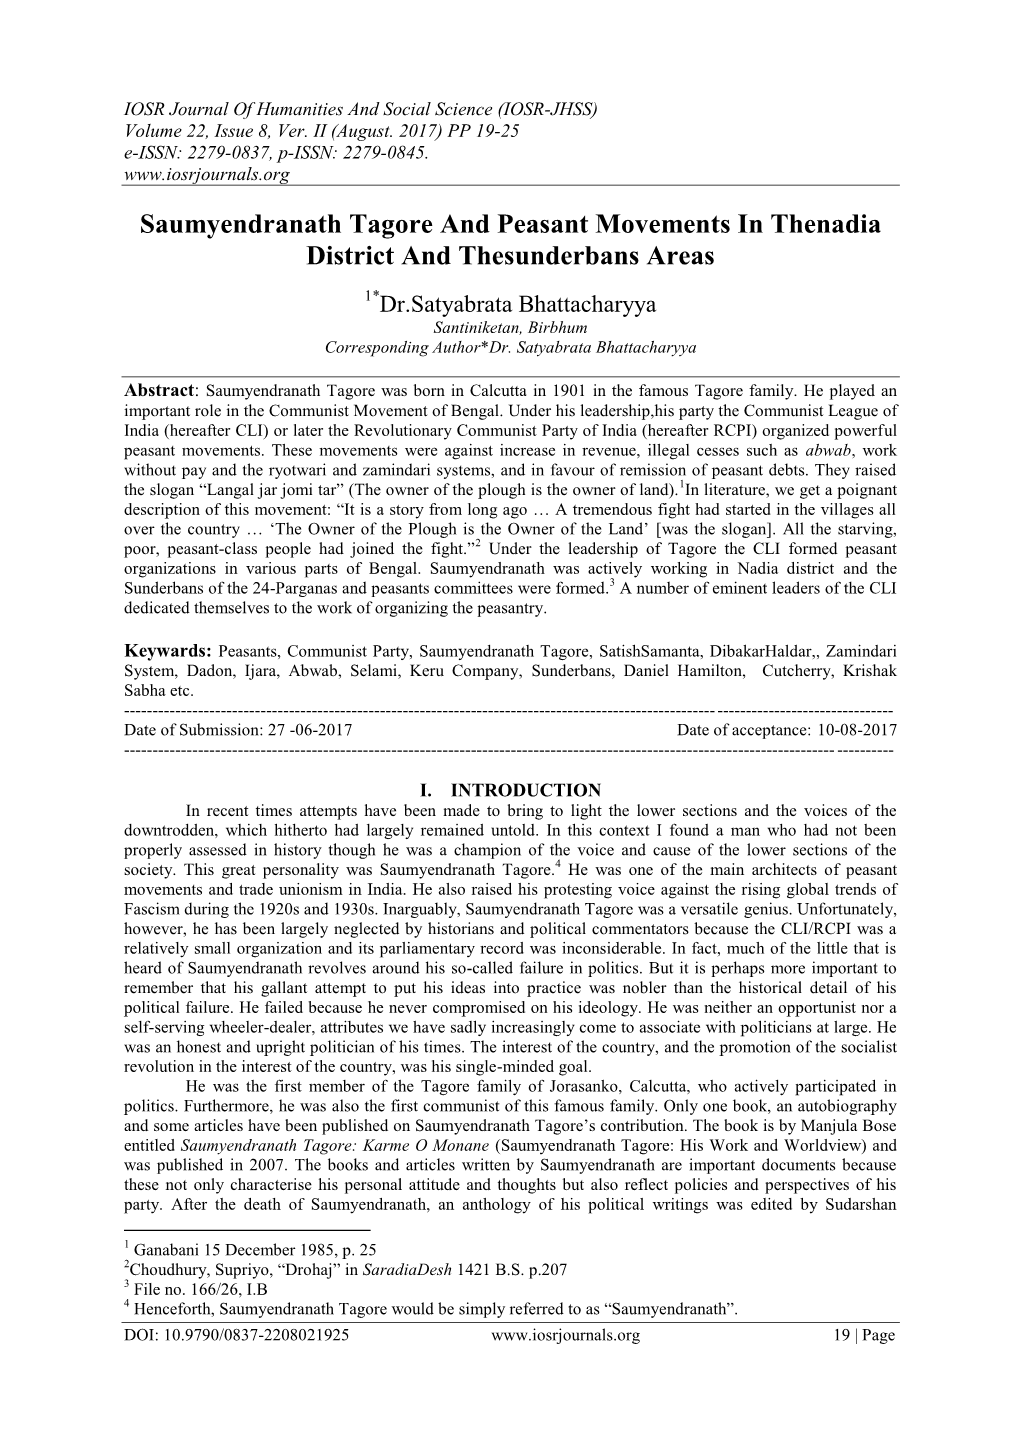 Saumyendranath Tagore and Peasant Movements in Thenadia District and Thesunderbans Areas